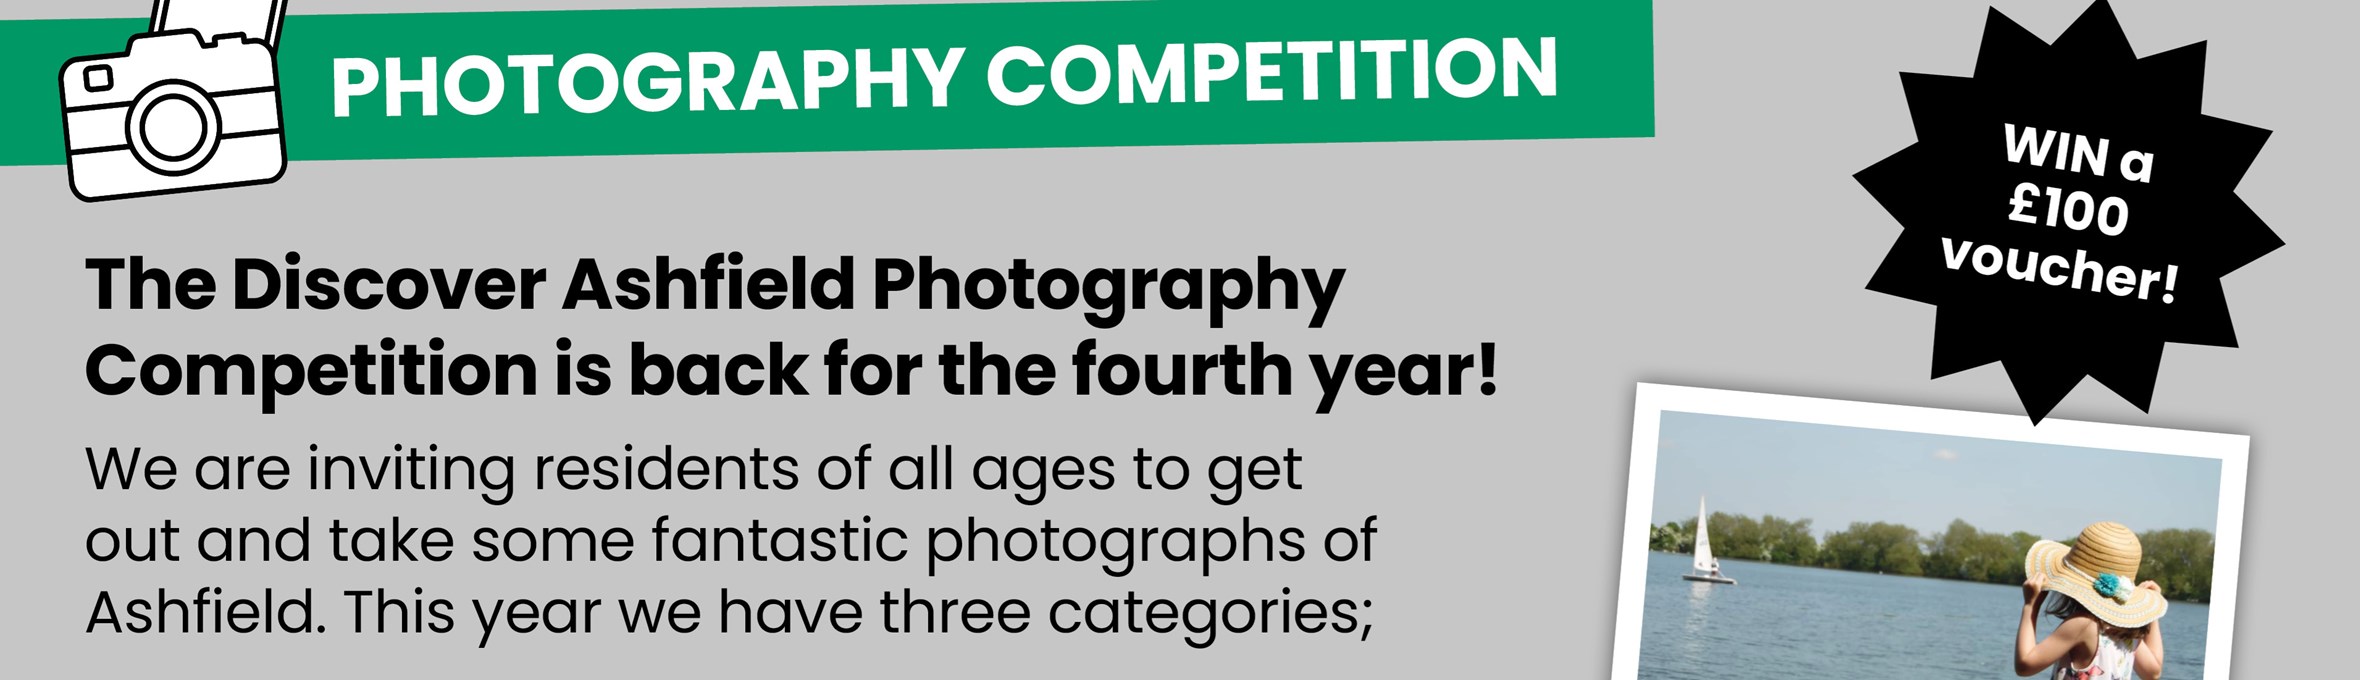 Discover Ashfield photography competition information graphic